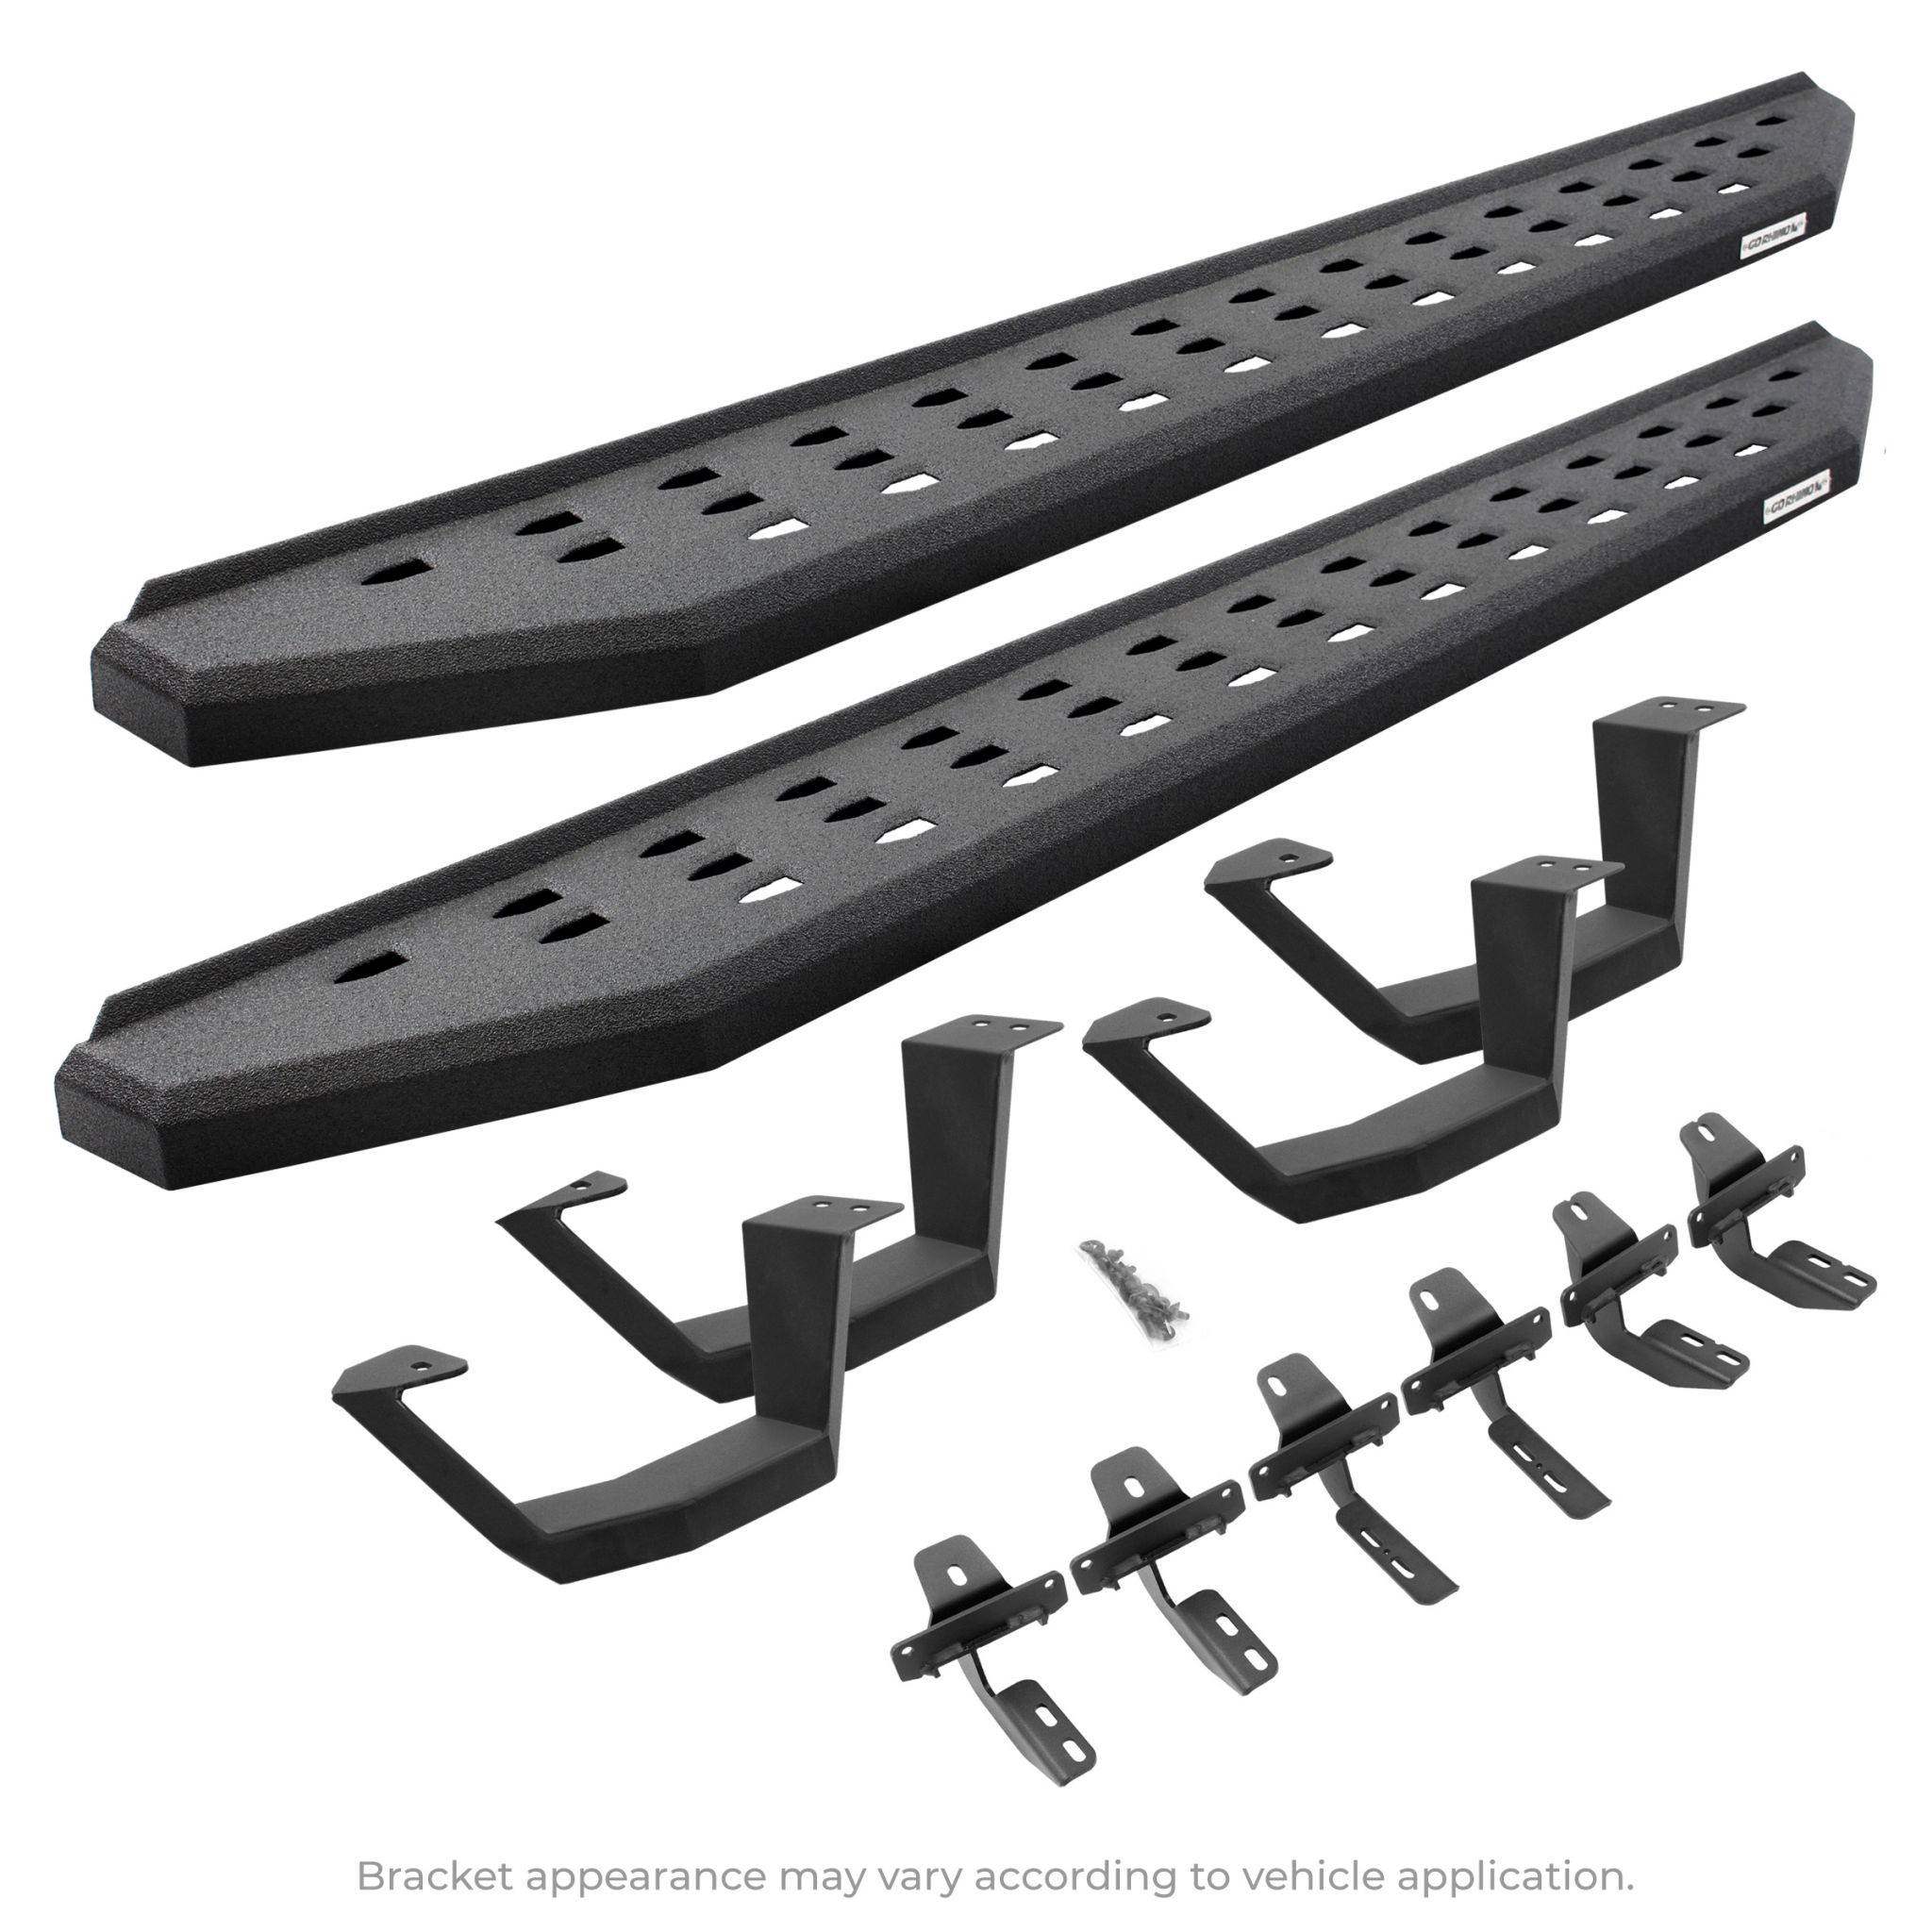 Go Rhino - 6941268020T - RB20 Running Boards With Mounting Brackets & 2 Pairs of Drop Steps Kit - Protective Bedliner Coating